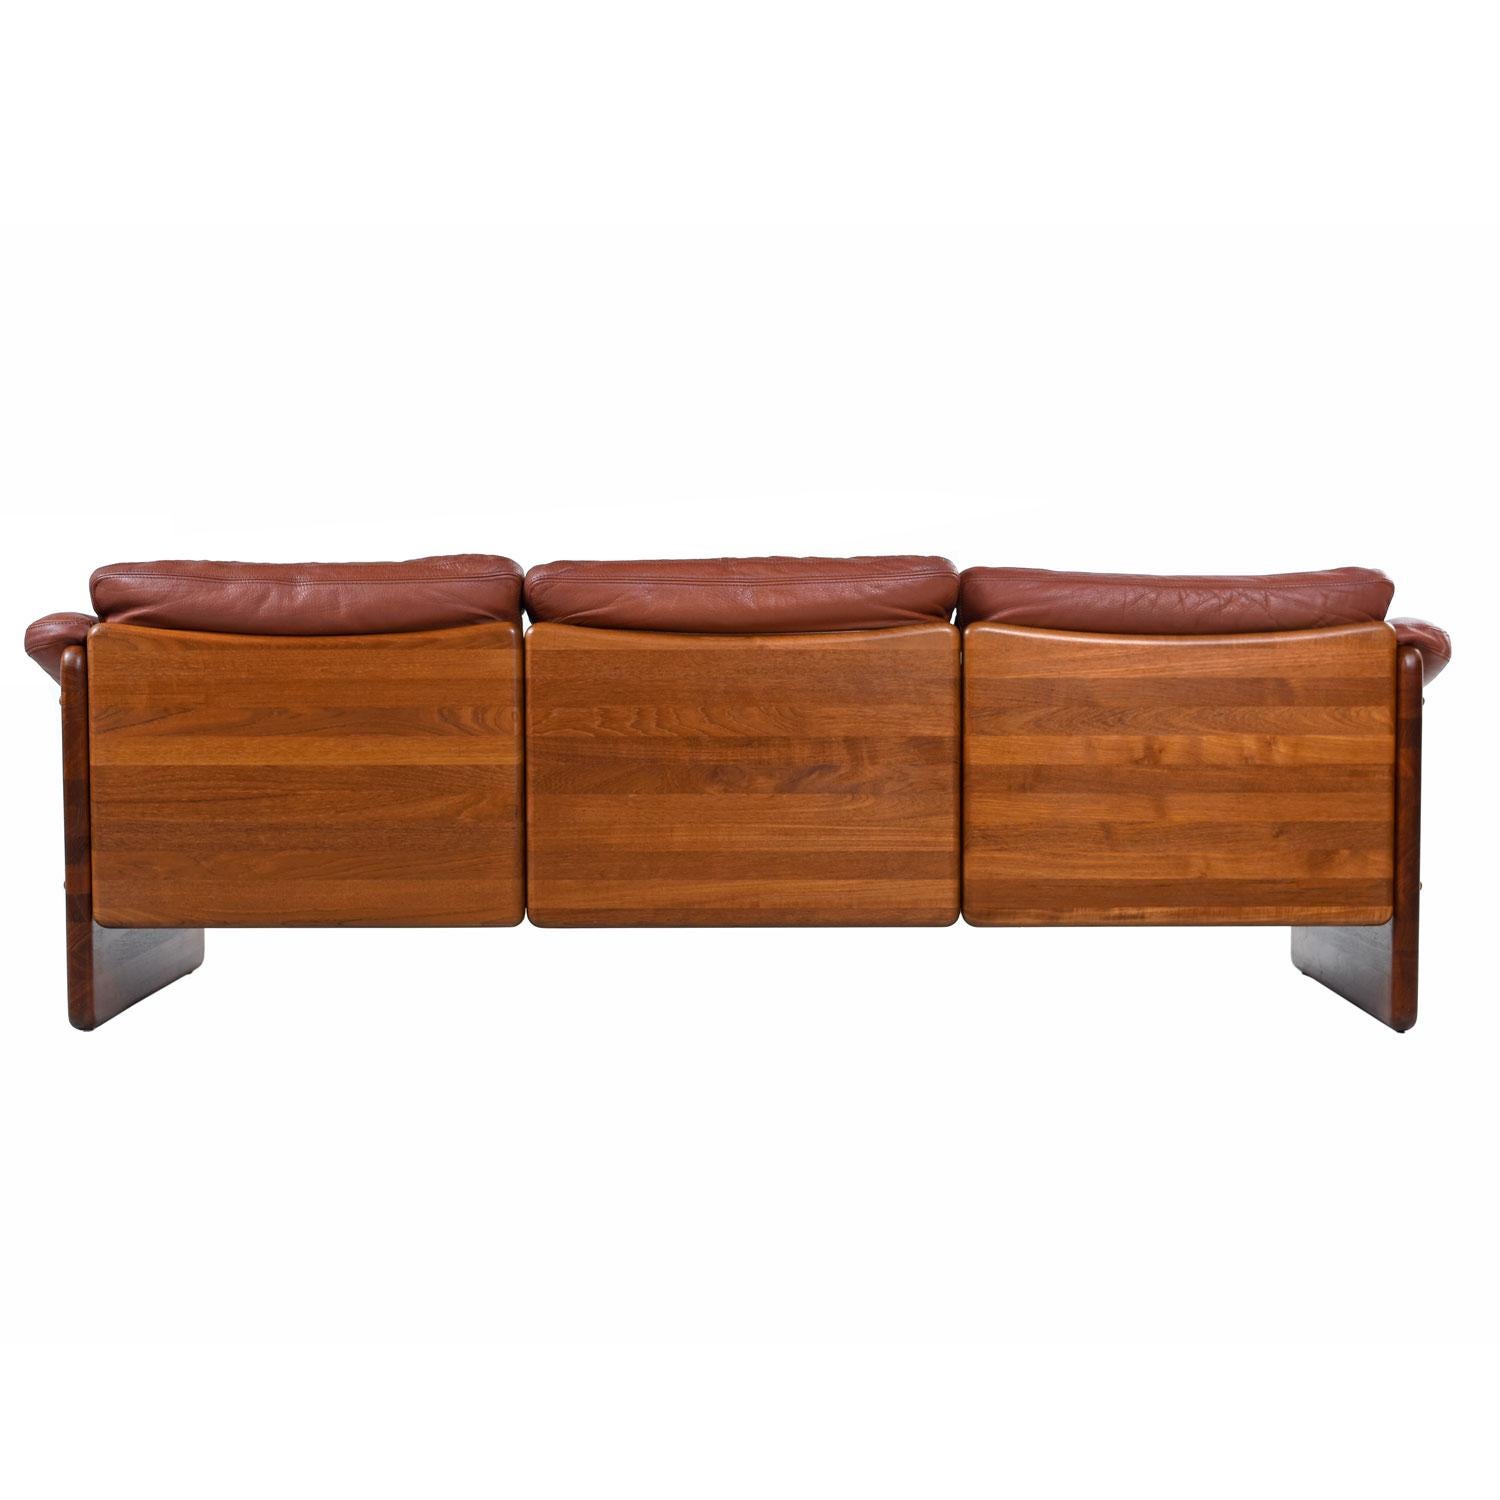 Made by A. Mikael Laursen in Denmark, circa late 1960s-early 1970s. Not your typical dainty Scandinavian Modern sofa. This hefty brute won't creek, wobble or bow under the weight of your guests or ask you to compromise quality and comfort for good